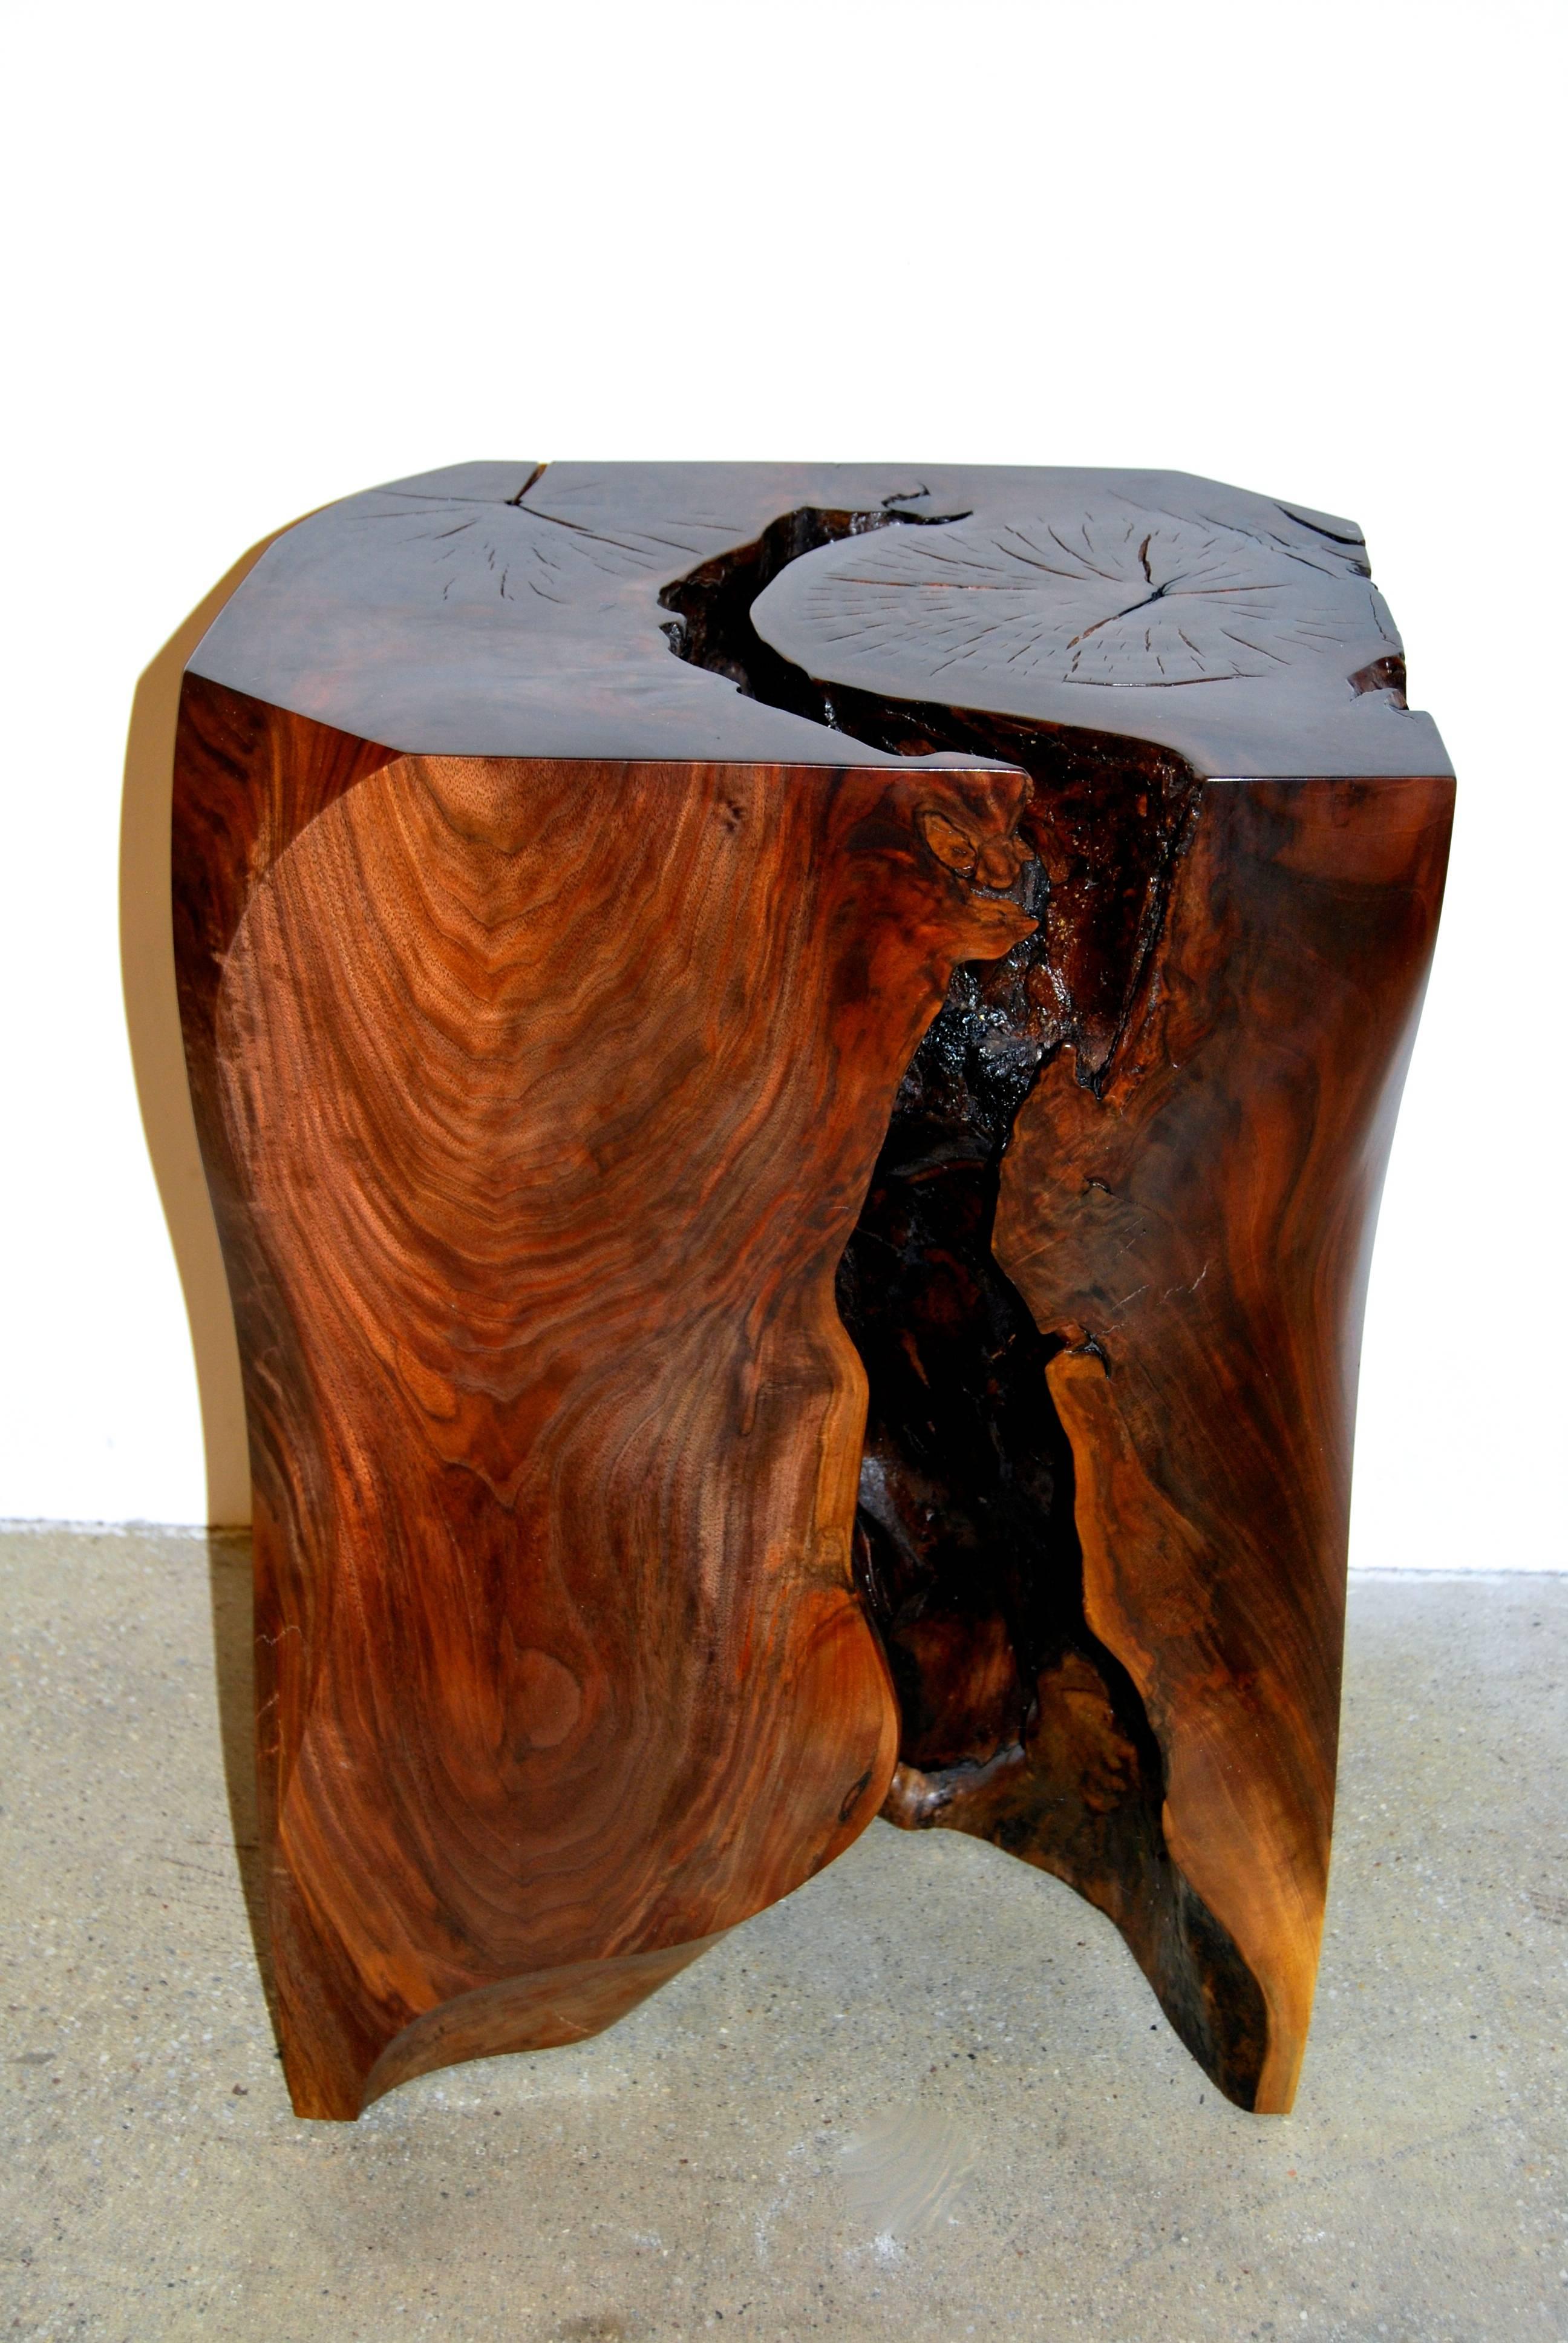 Solid walnut carved side table by artist Caleb Woodard with natural cavity.
Unique piece!
Incredible, sculptural presence.

This piece can be viewed at my gallery at 200 Lex, 10th fl.
Please contact me for further details.